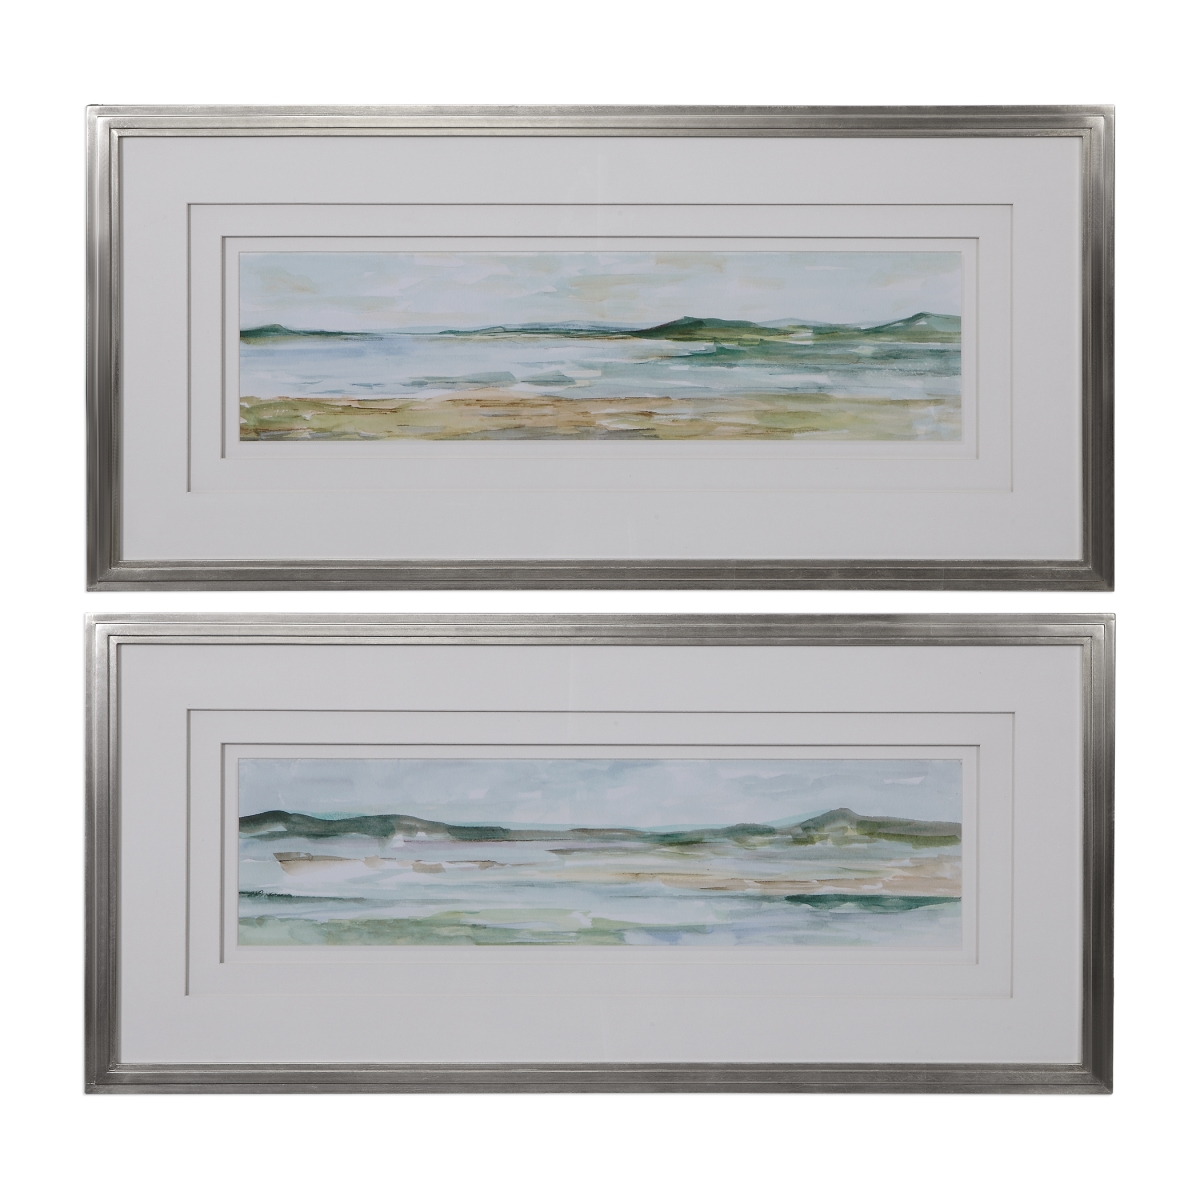 Picture of 212 Main 41594 Panoramic Seascape Framed Prints - Set of 2